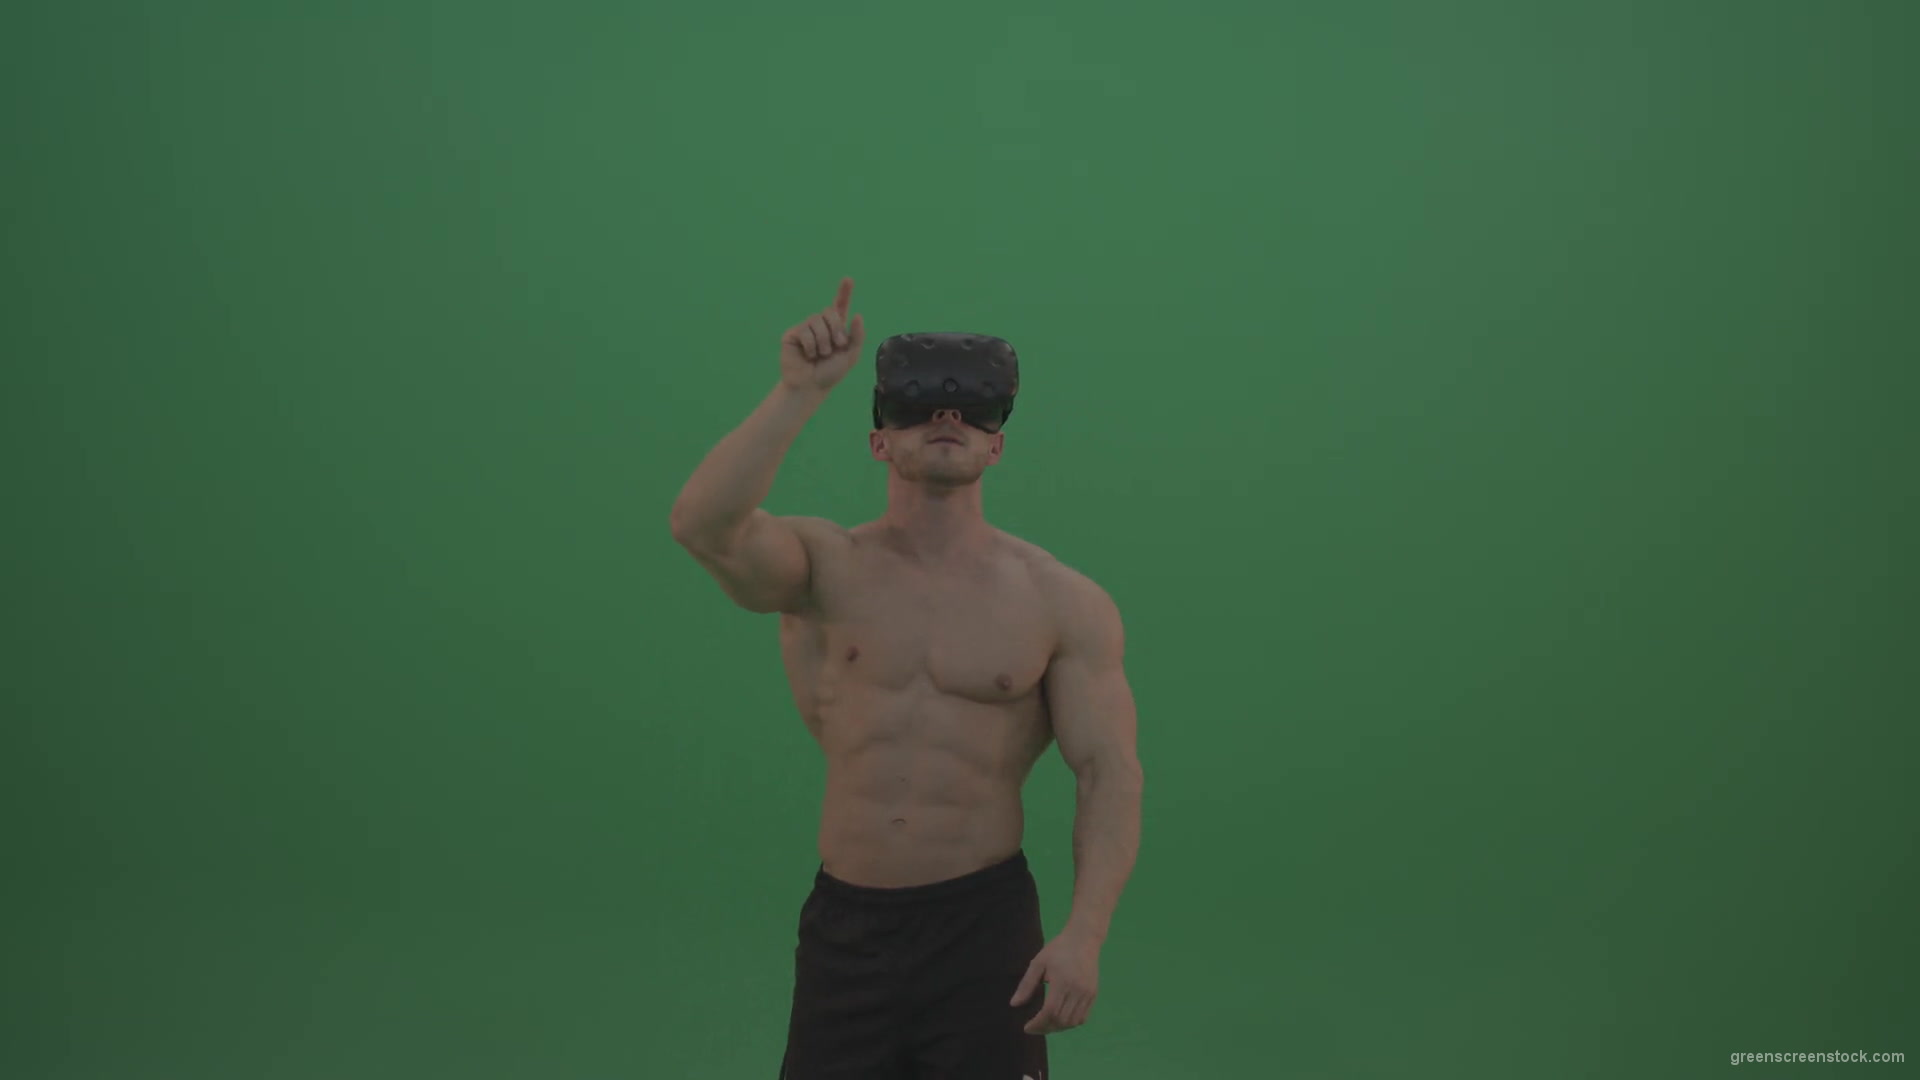 Young_Athletic_Bodybuilder_Working_On_Touch_Pad_Using_Virtual_Reality_Kit_On_Green_Screen_Wall_Background-1920_009 Green Screen Stock